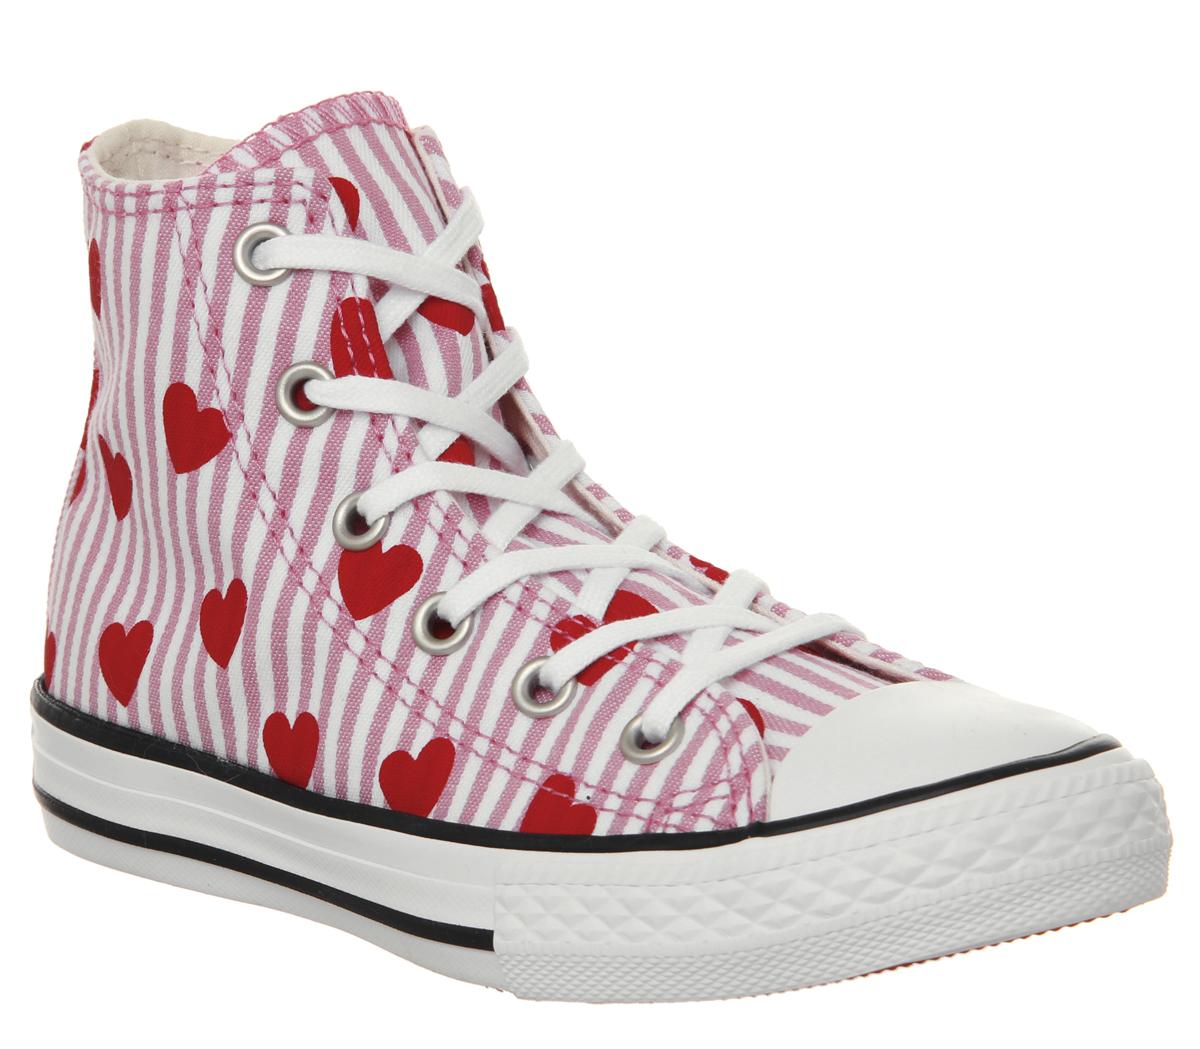 ConverseAll Star Hi Mid TrainersPink Stripe Red Heart